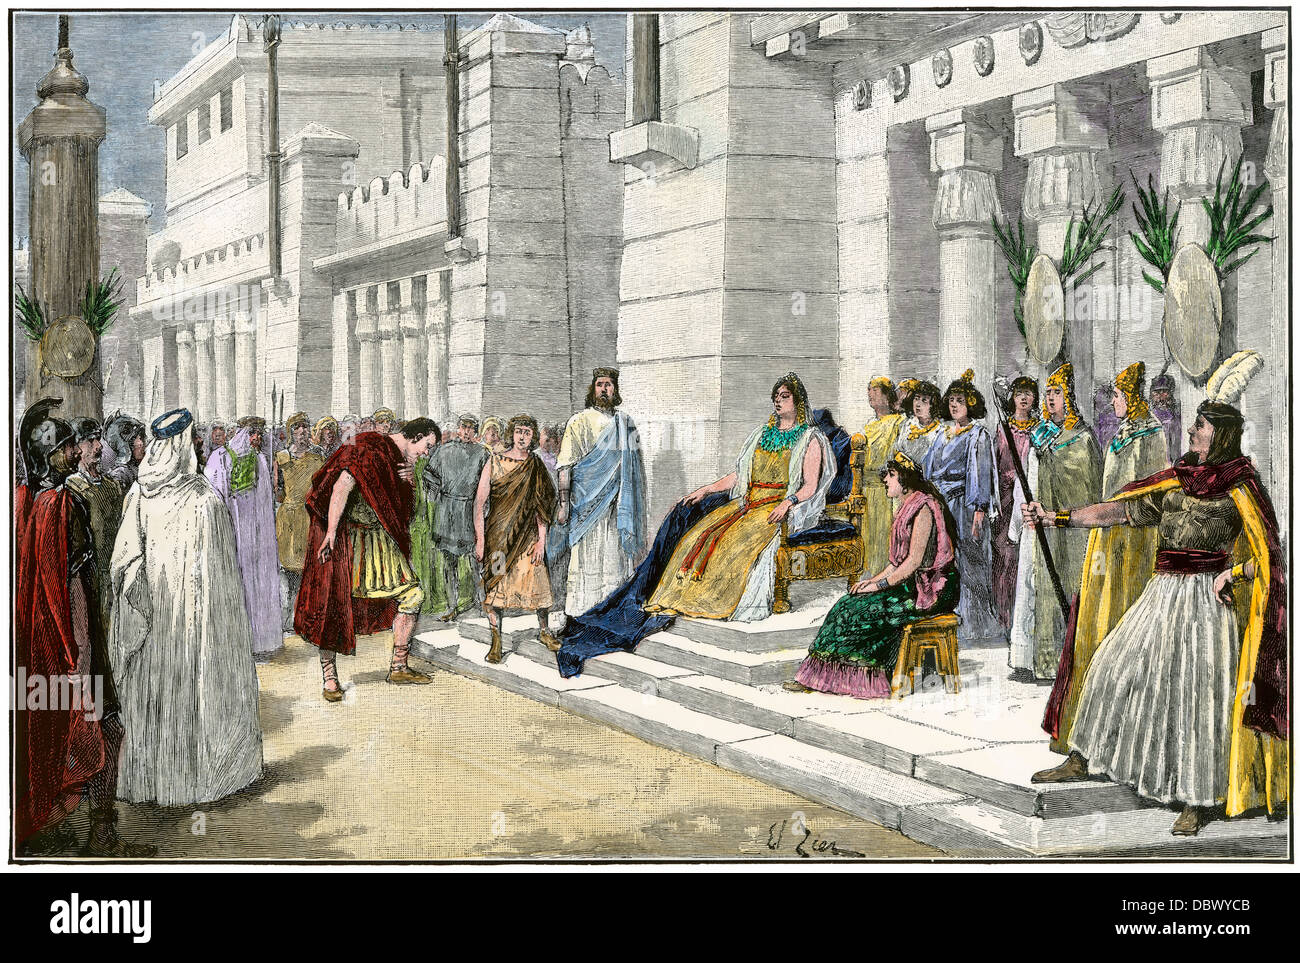 Dido, founder of Carthage, receiving Aeneas, a hero of the Trojan Wars. Hand-colored woodcut Stock Photo